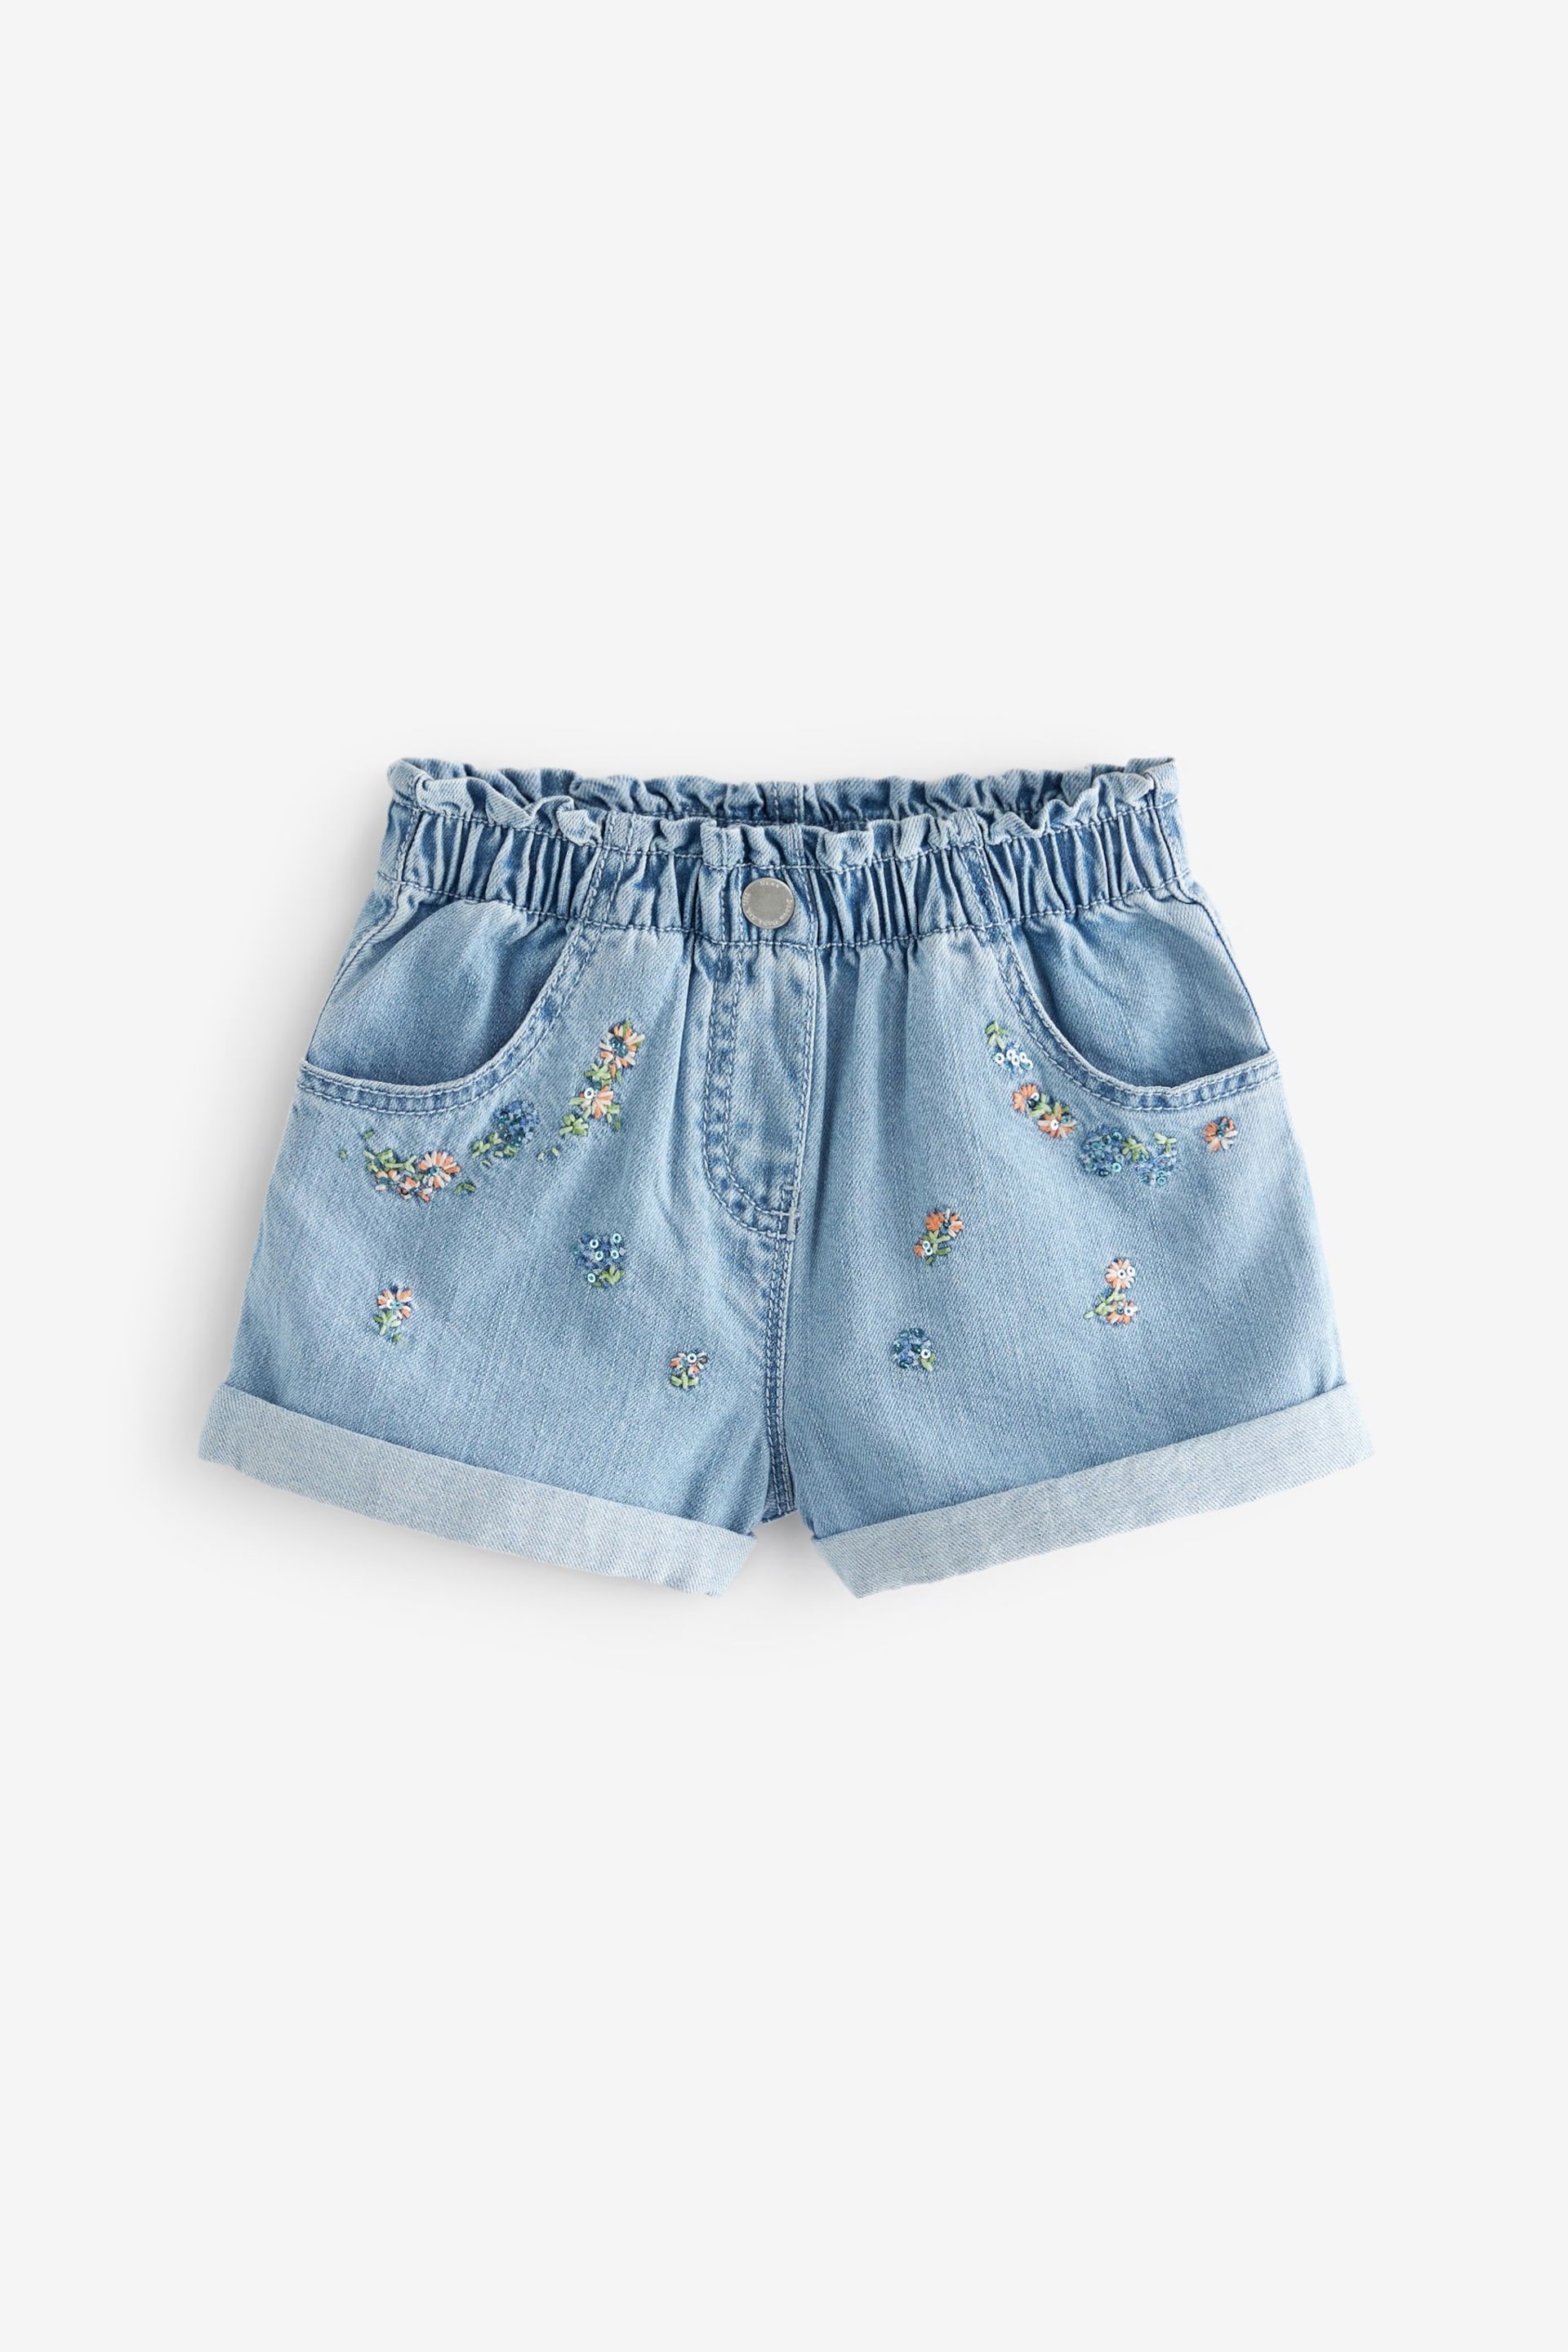 Denim Floral Embroidered Shorts (3mths-7yrs) - Image 5 of 7